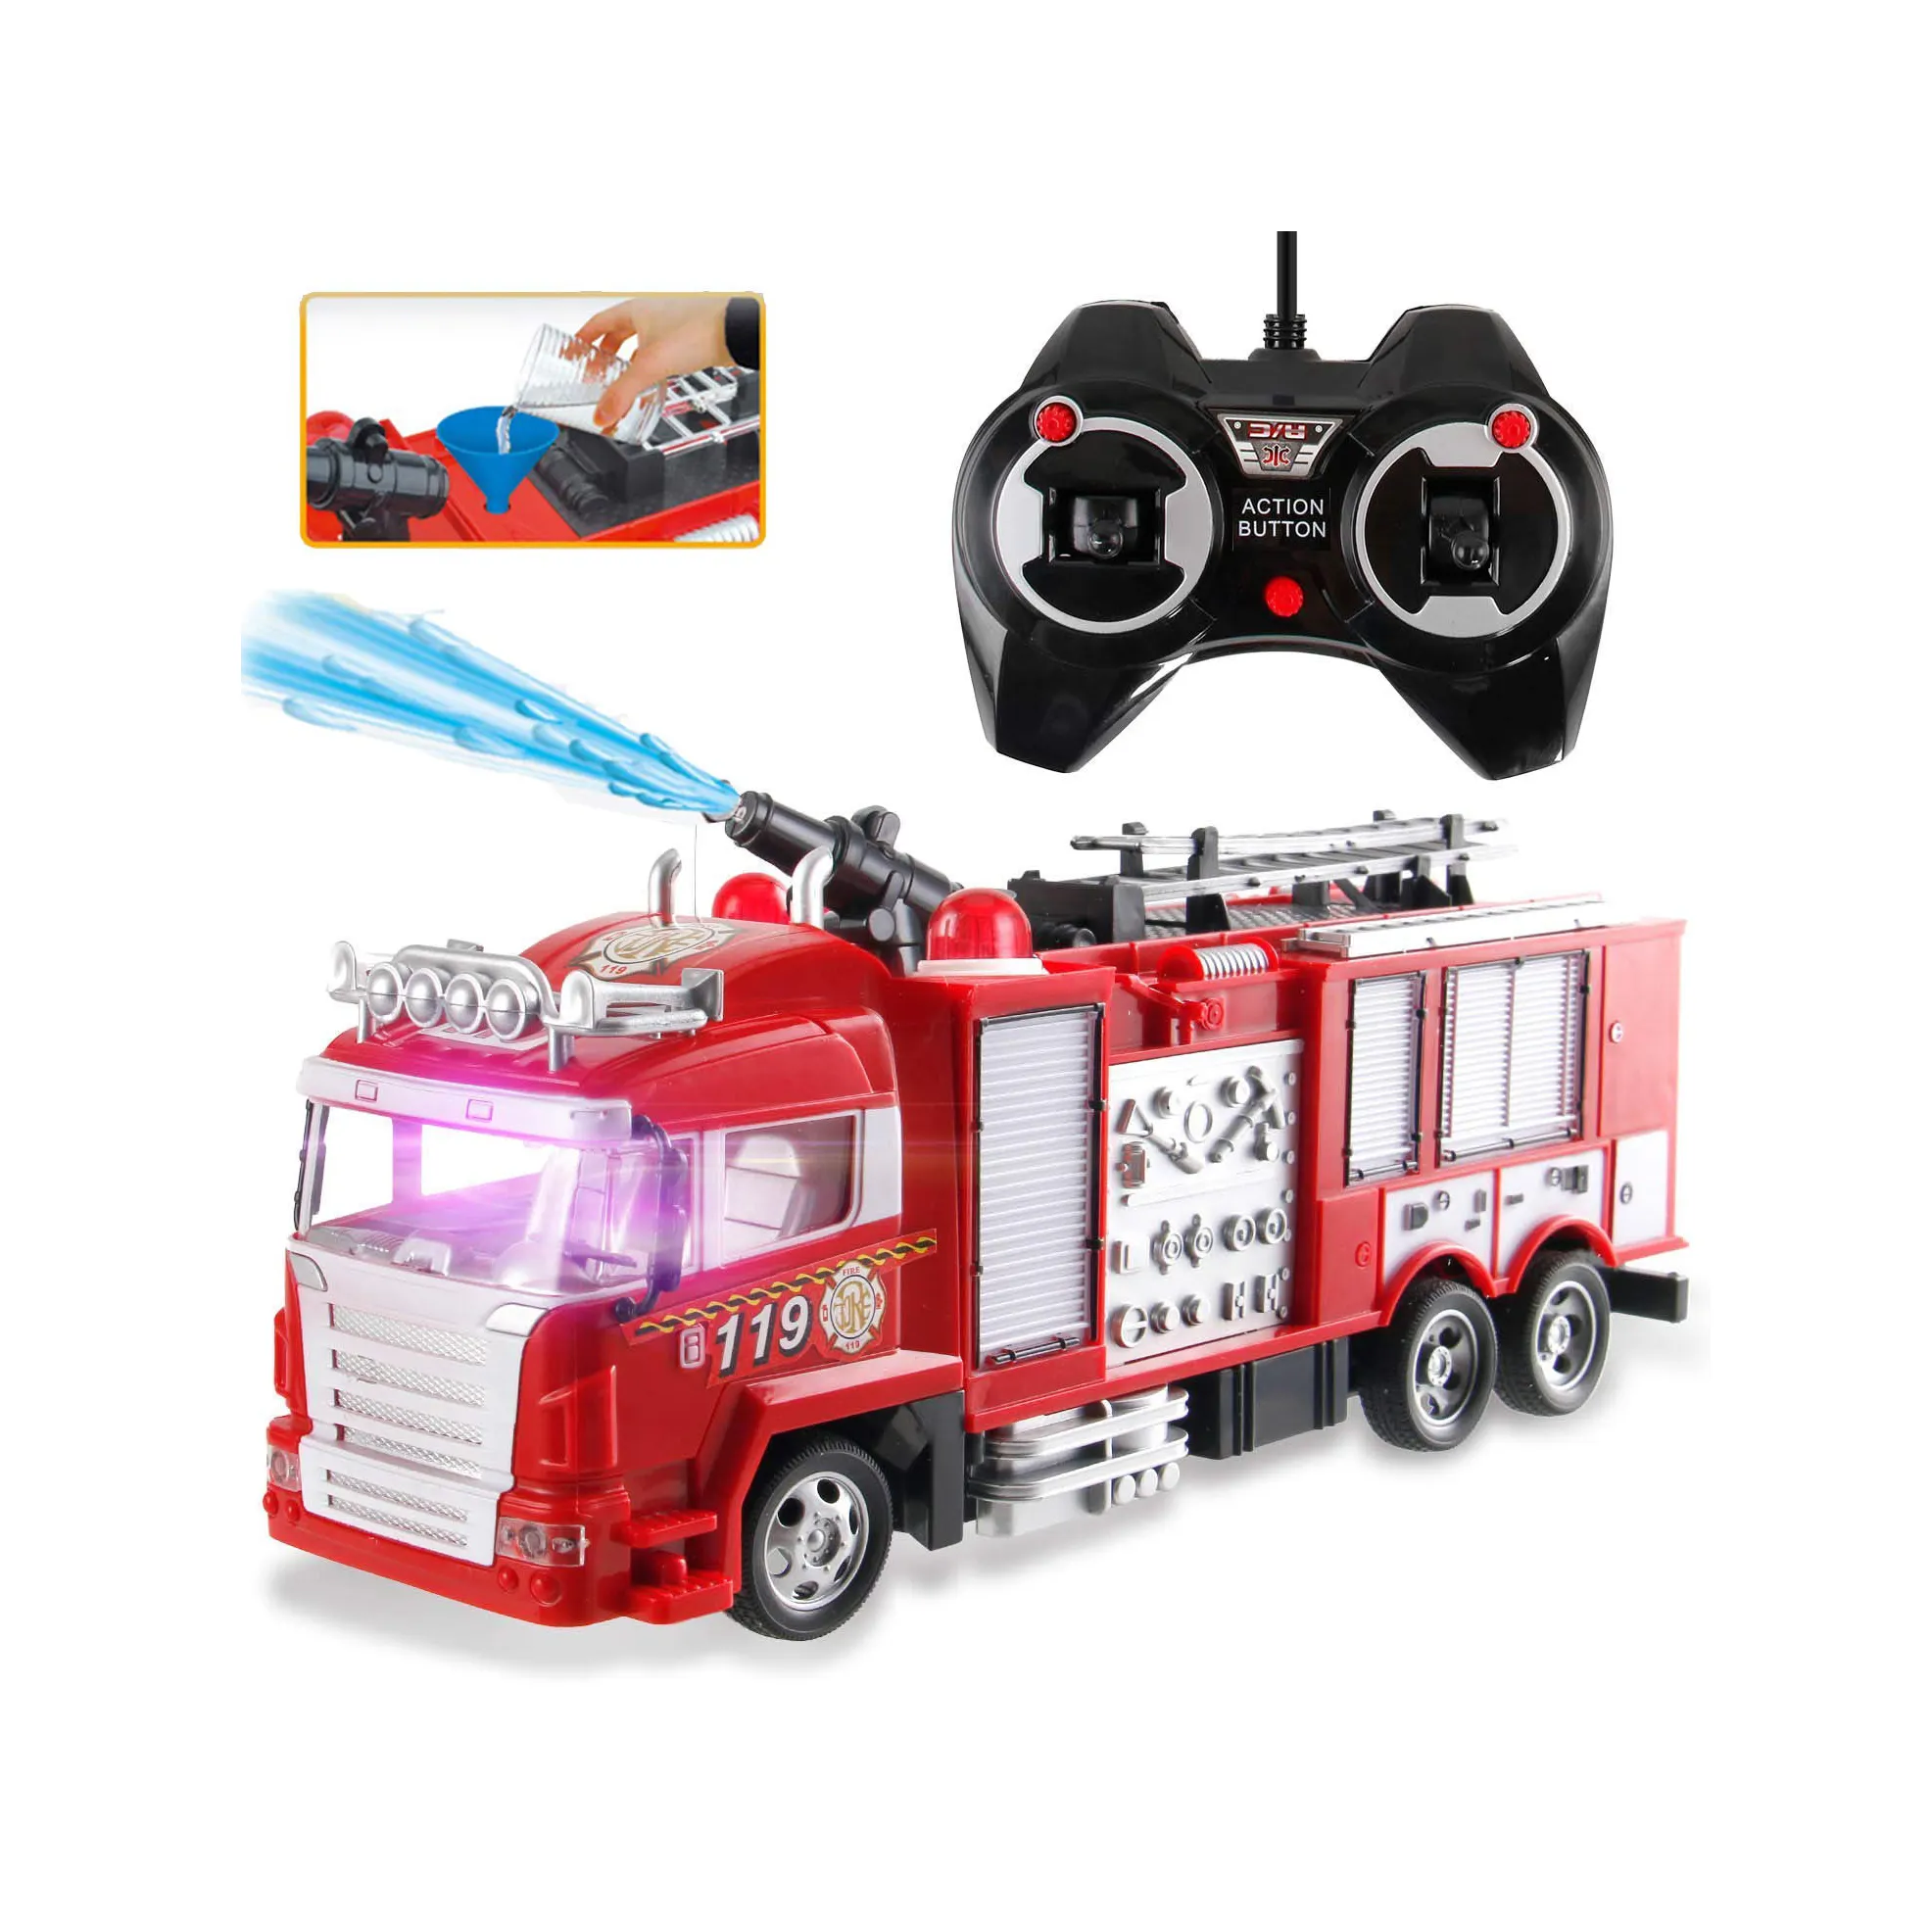 R/C Rescue Fire Engine Toy Truck - Radio Control RC Fire Truck with Working Water Pump Shoots and Squirts Water